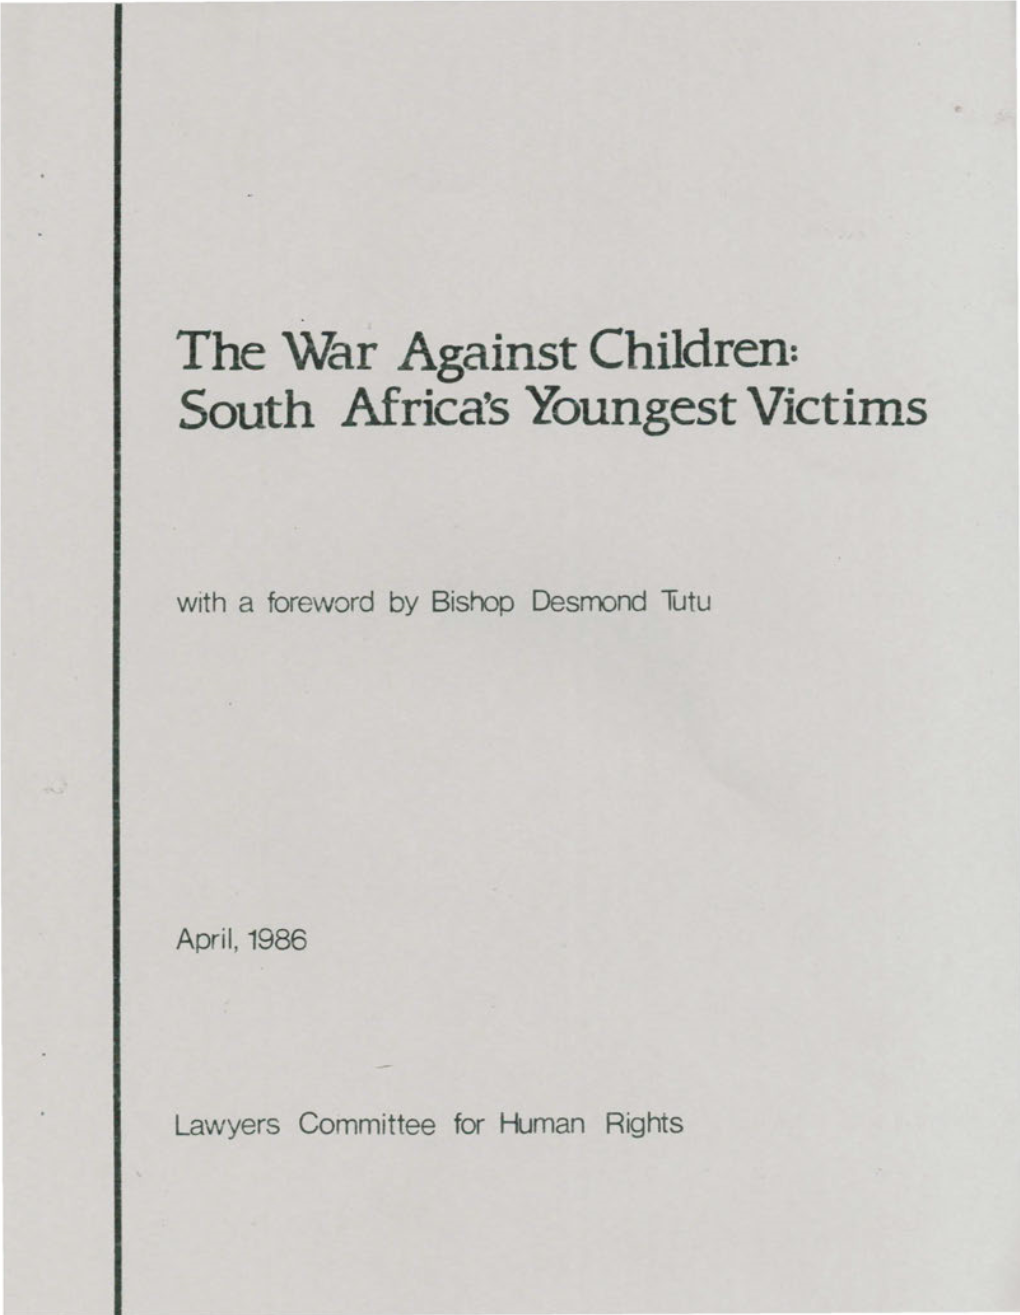 The War Against Children= South Africa's Youngest Victims